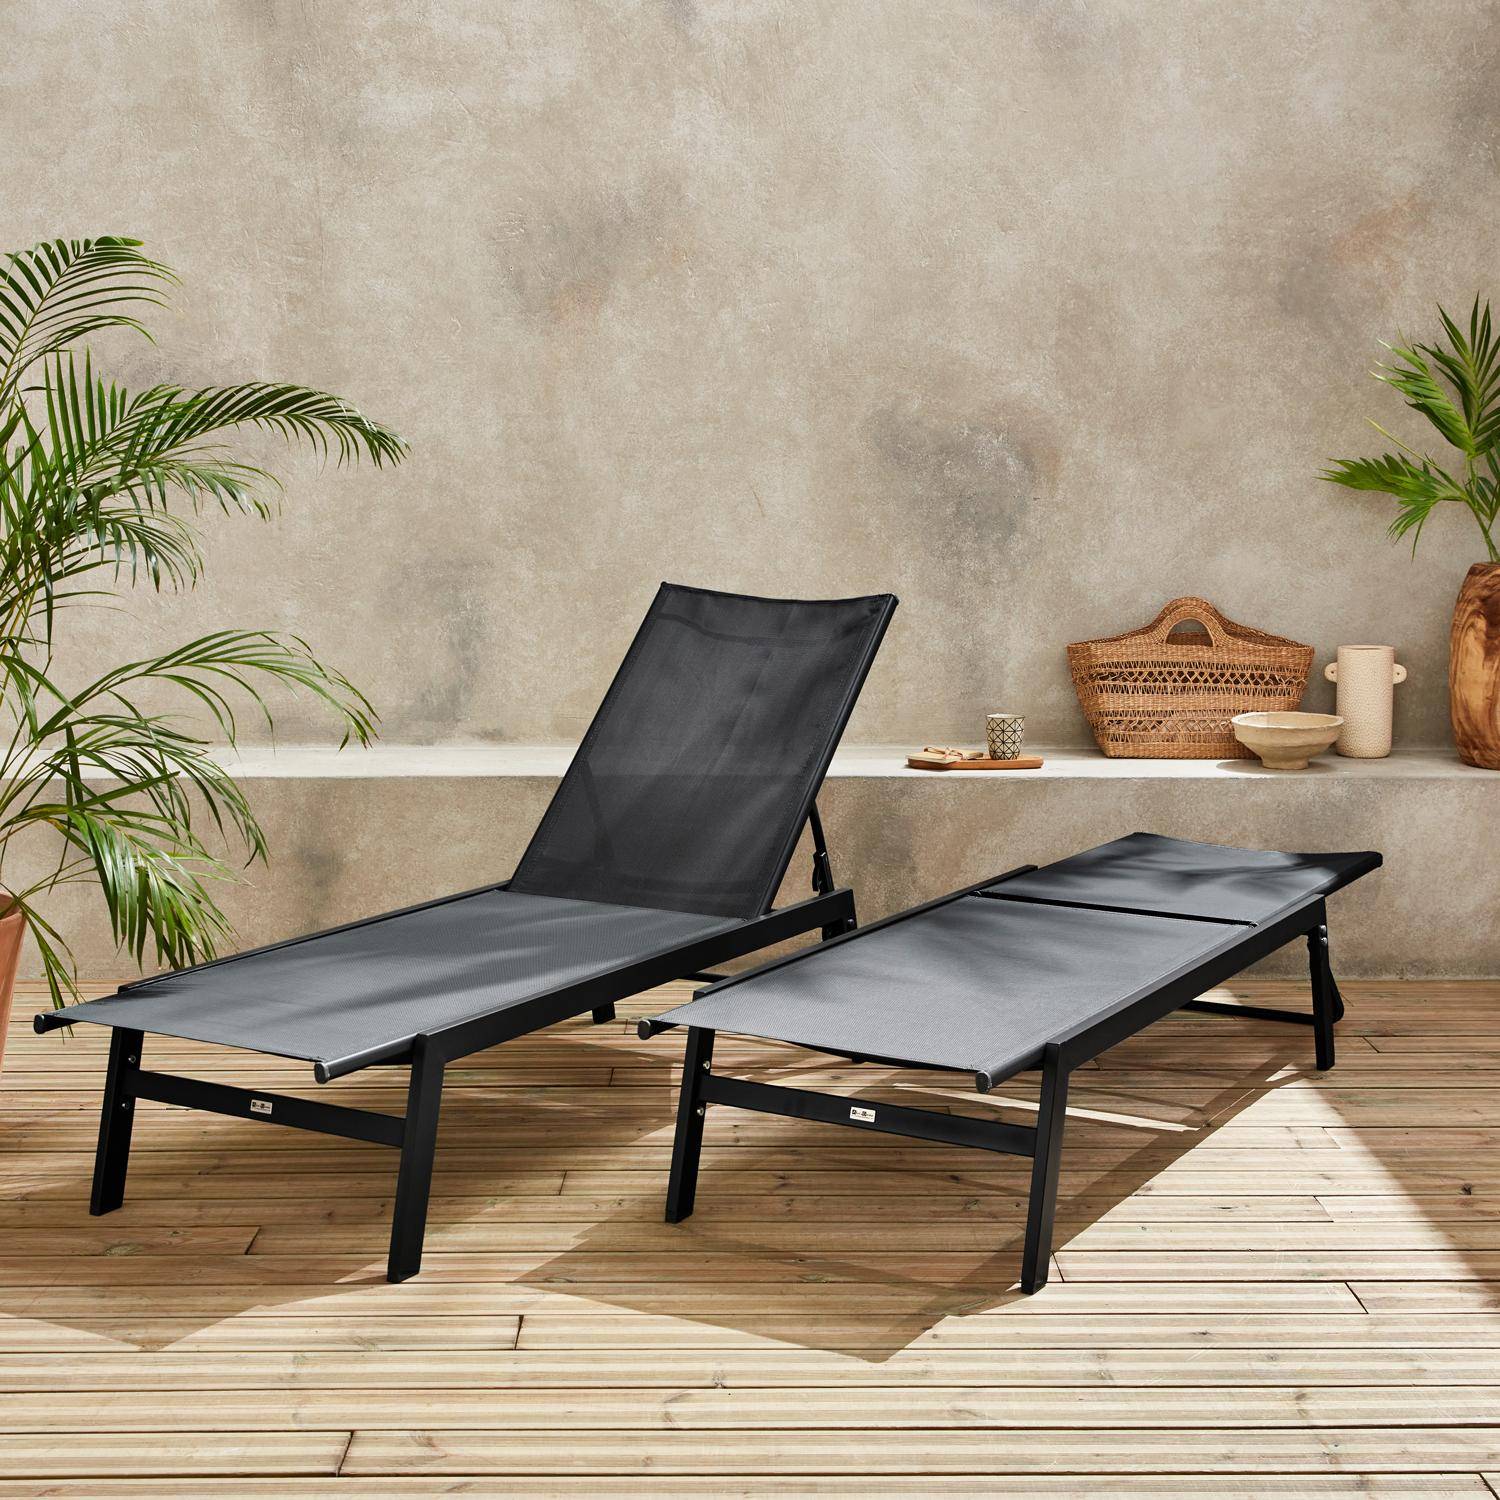 Pair of Textilene and Metal Multi-Position Sun Loungers, Black Photo2